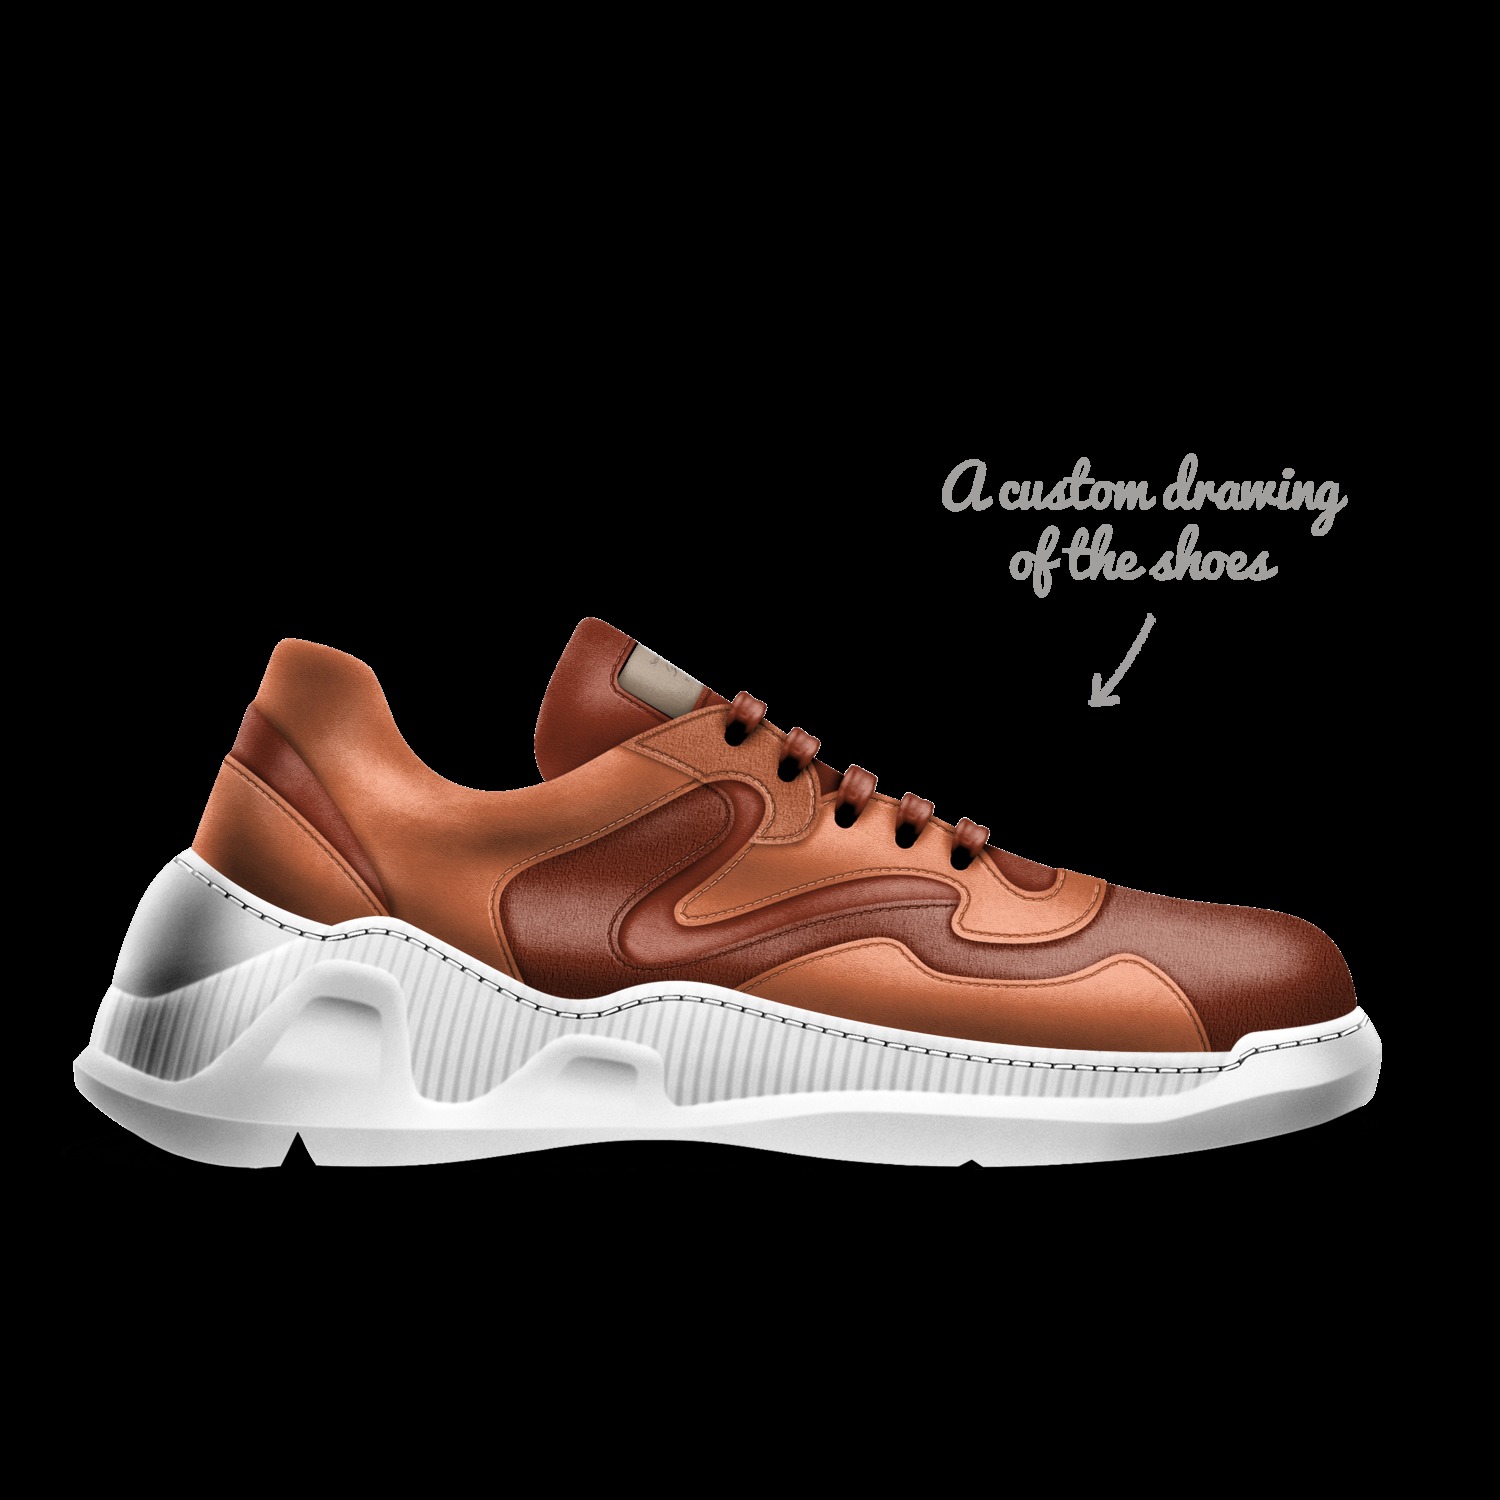 A Custom Shoe concept by Poindexter Cosby